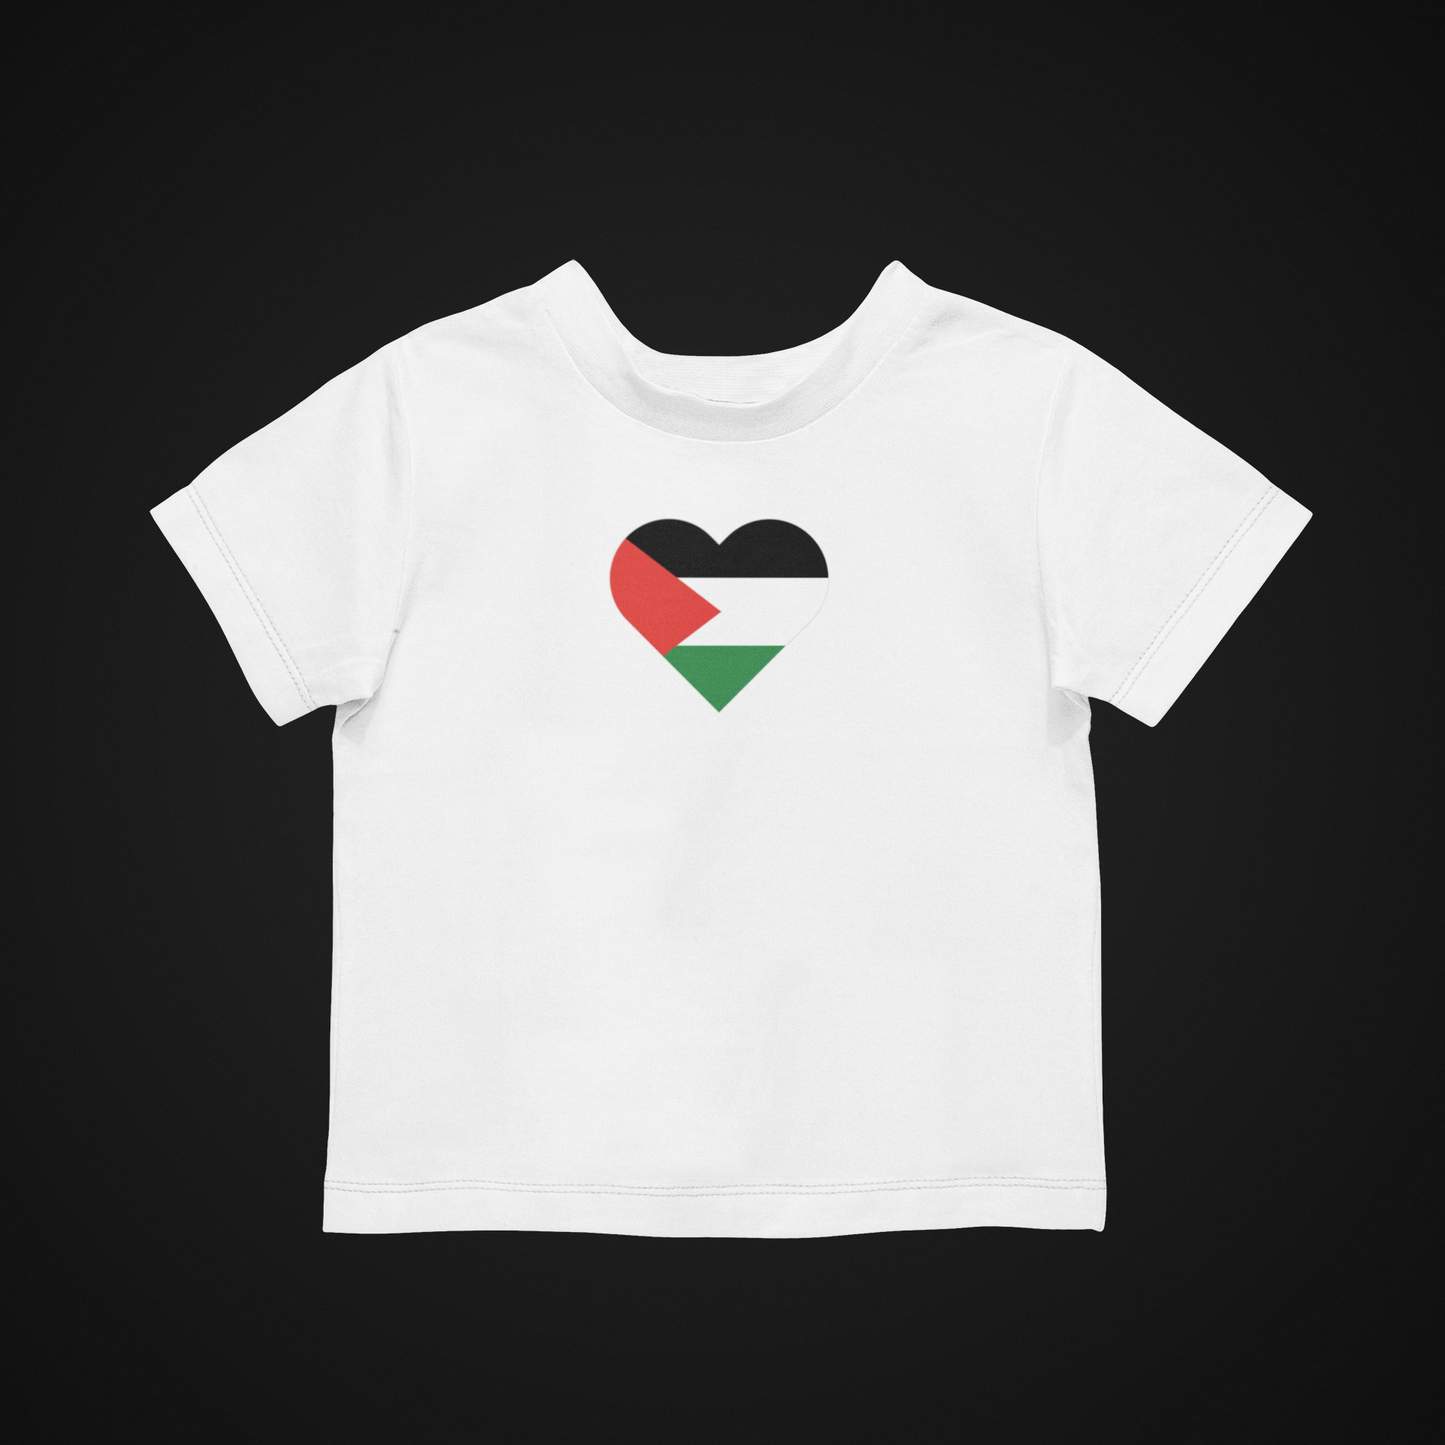 Free Palestine - Let Know Child Live In Fear or Hunger - Childrens Tee